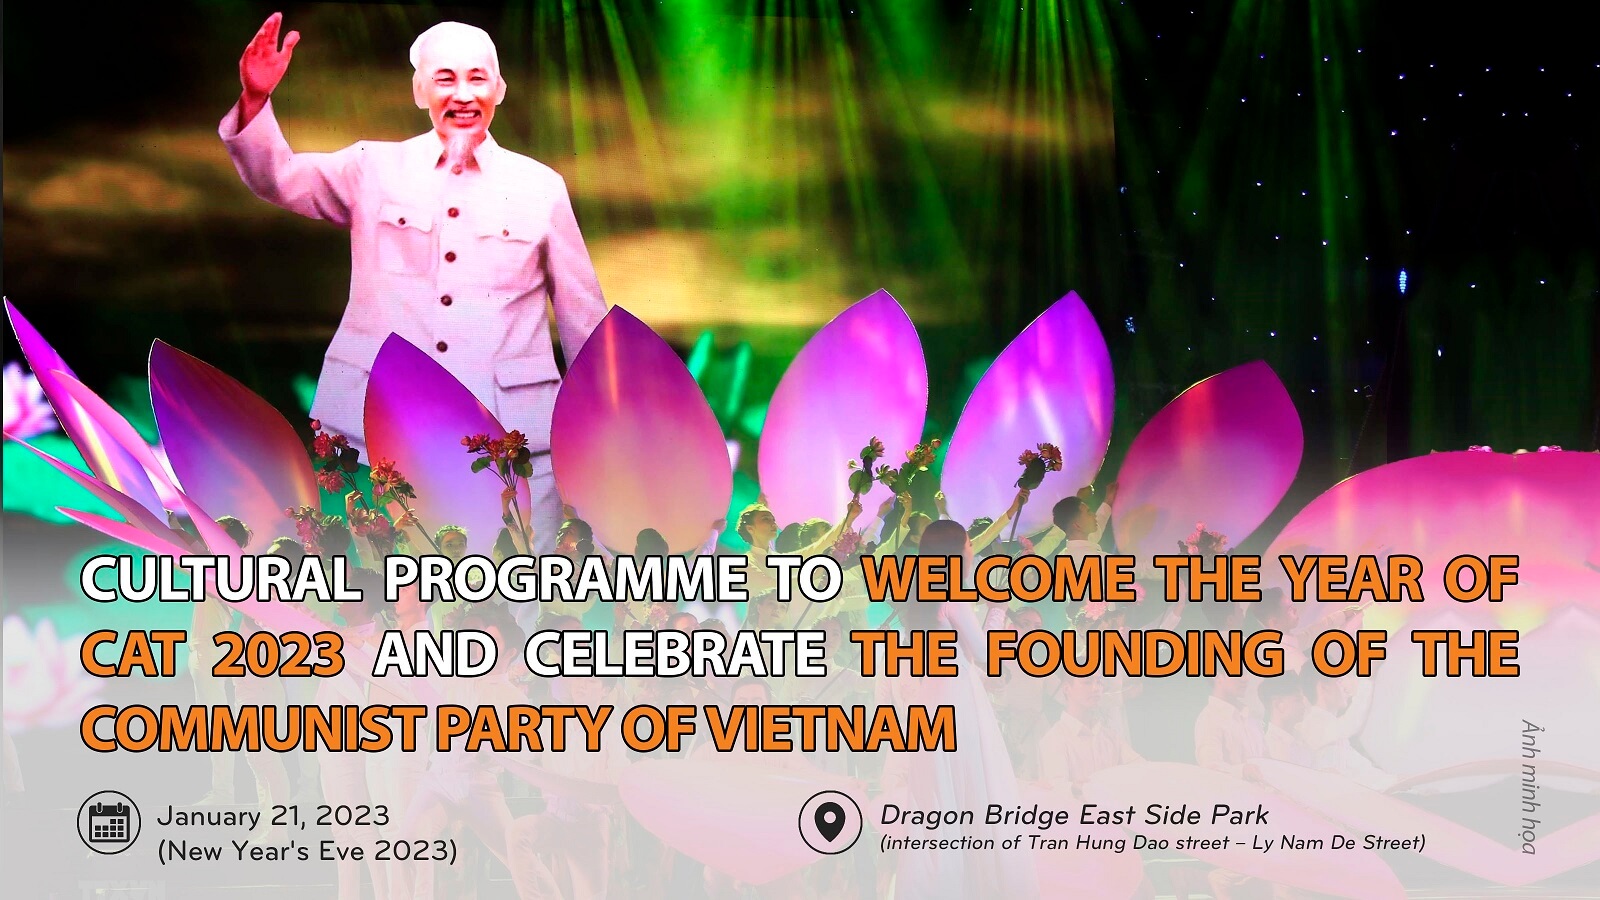 2 Cultural Programme To Welcome The Year Of Cat 2023 And Celebrate The Founding Of The Communist Party Of Vietnam